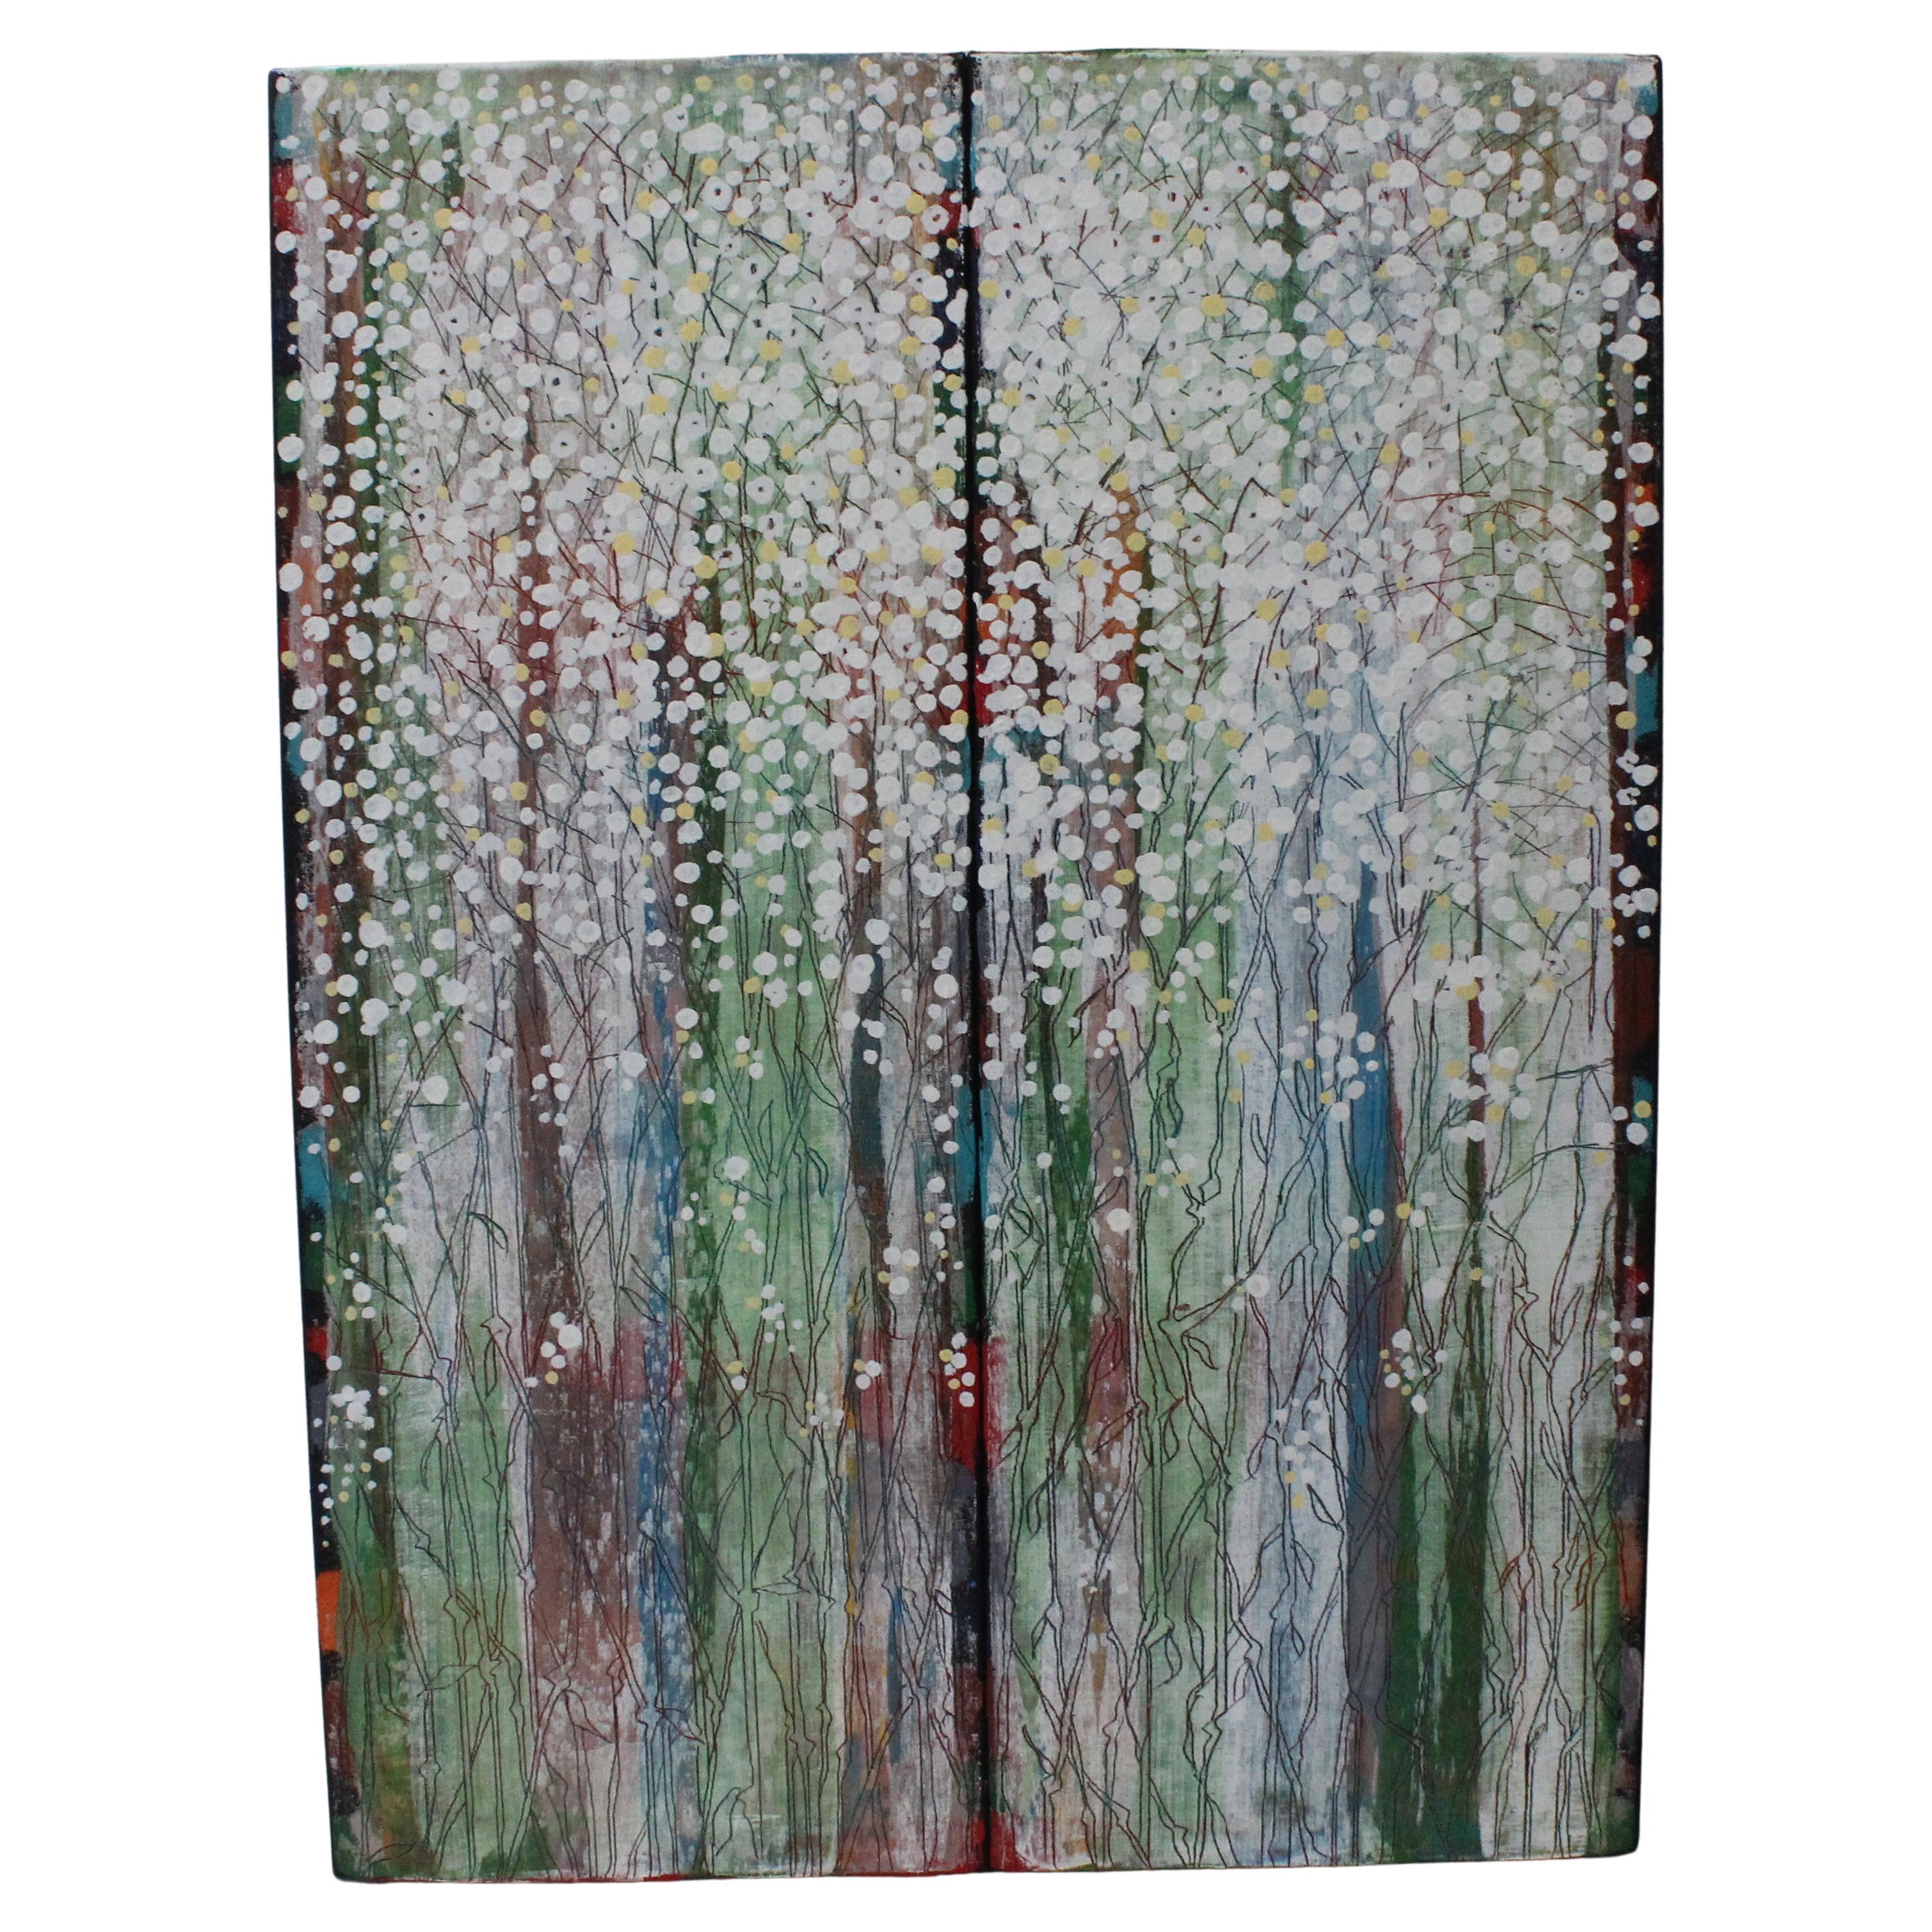 This stylish painting was created in 1991 by the painter Nobu Fukui, and it was originally purchased at the Hawkin Gallery in Palm Beach, Fl. 

Note: The title of the piece is 